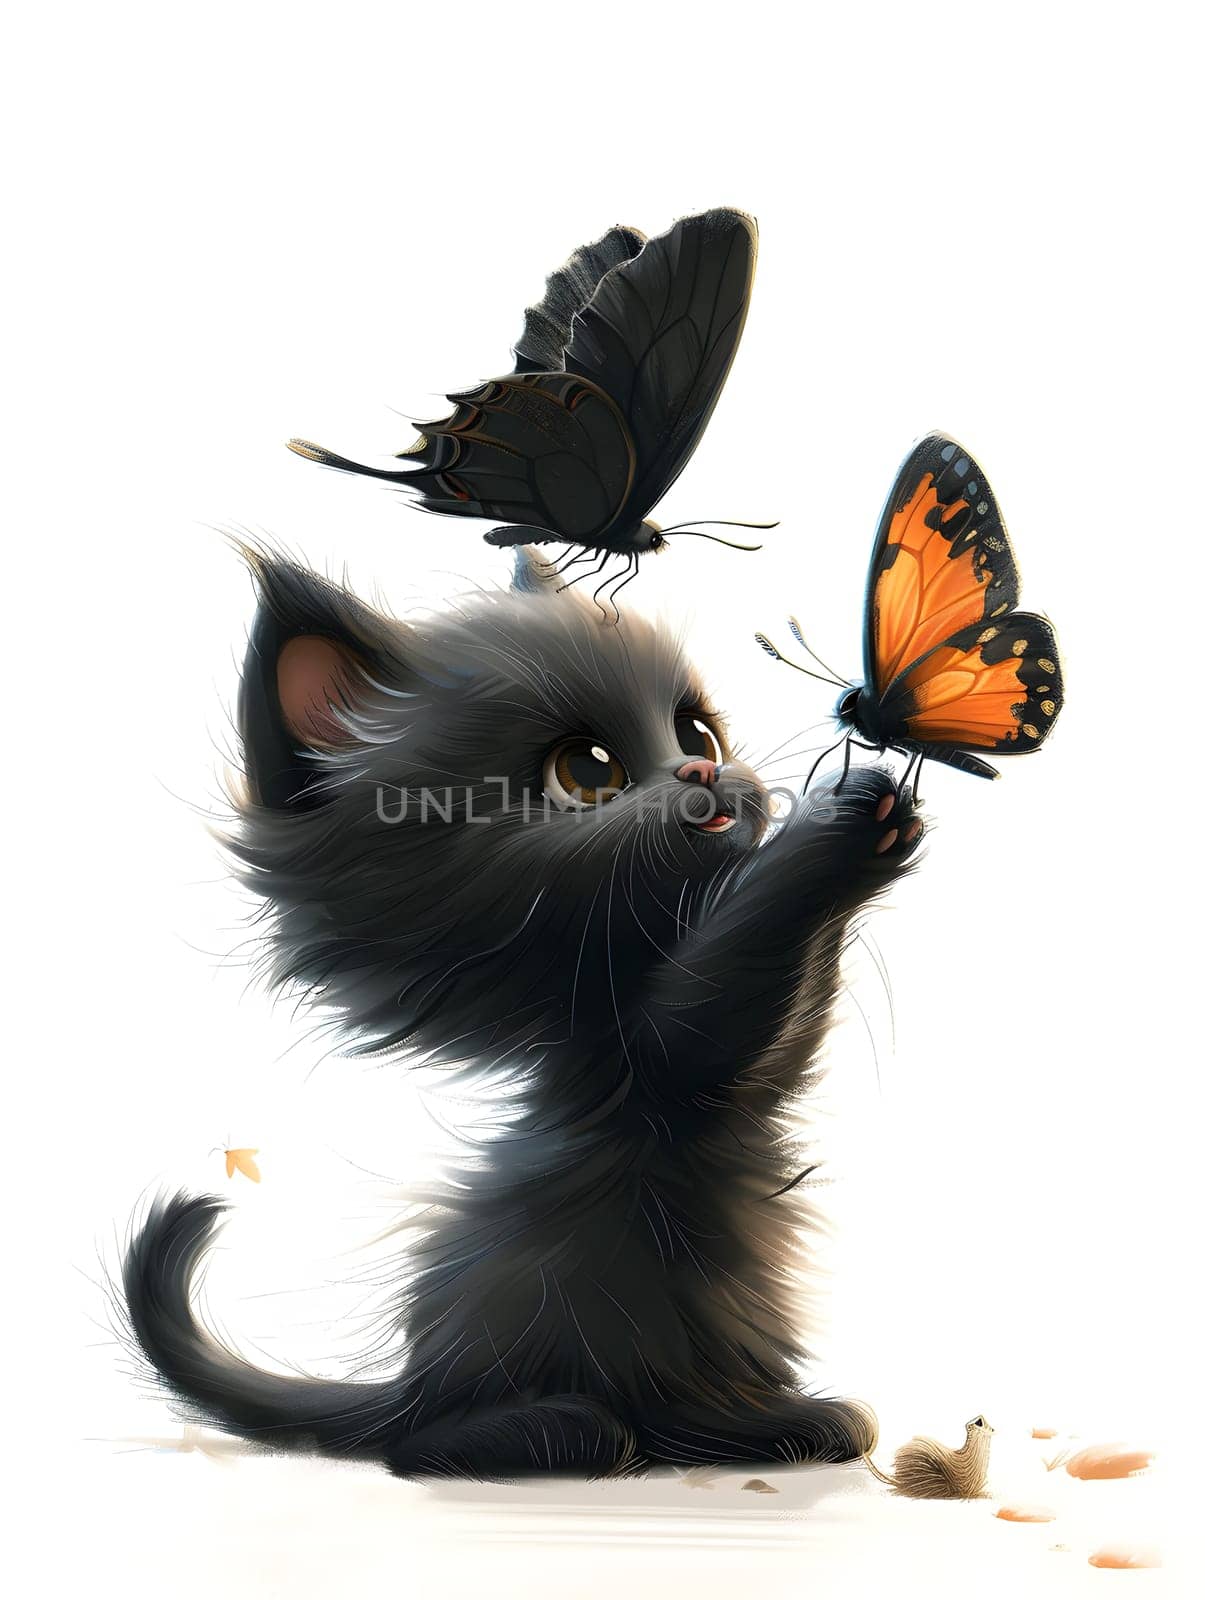 A Felidae with black fur is playfully holding a delicate Pollinator, a Butterfly, in its paws, showcasing the contrast between the strong Cat whiskers and the fragile Insect wings